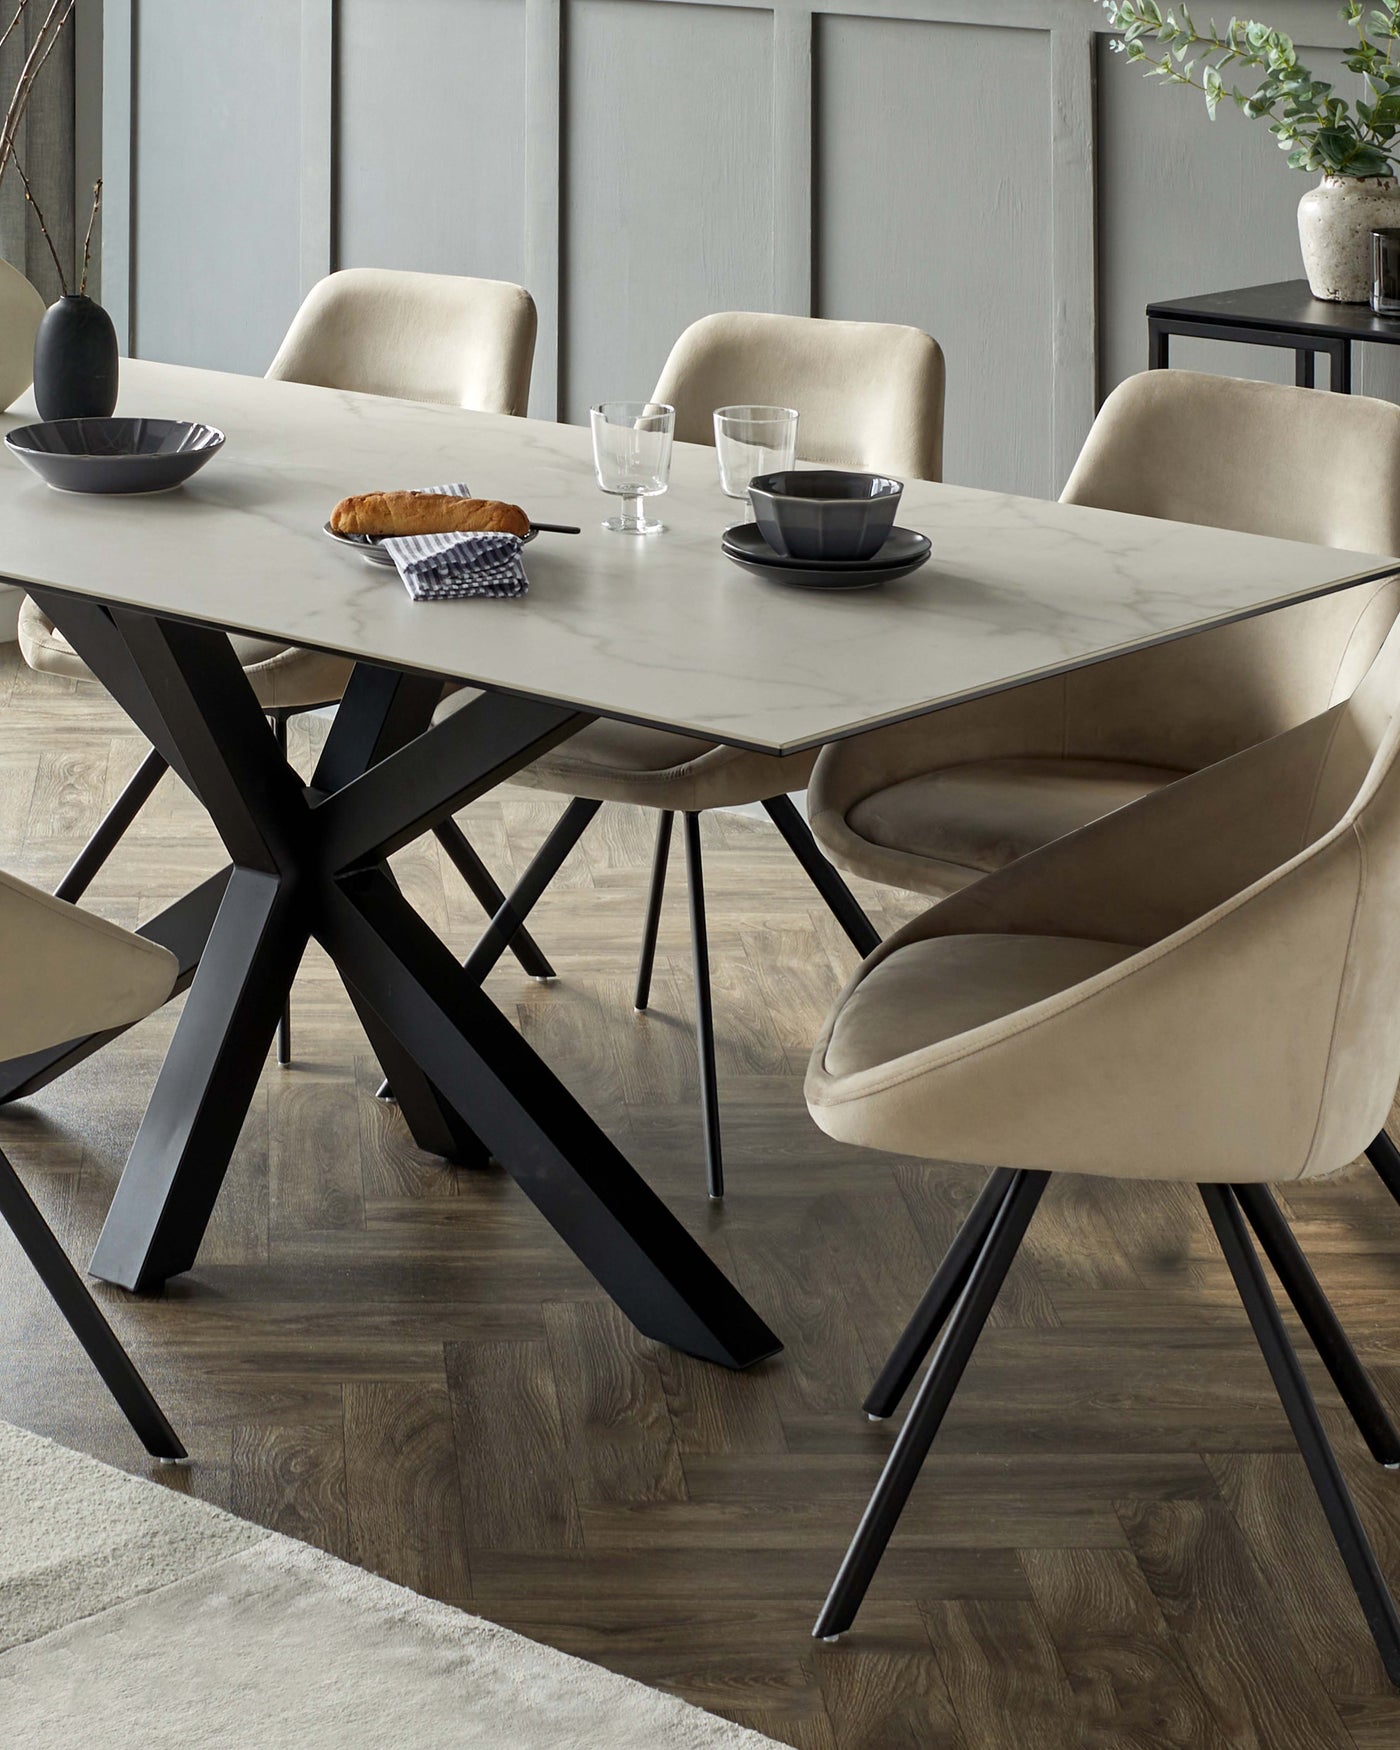 Contemporary dining room featuring a rectangular marble-top table with a unique geometric black metal base and a set of luxurious beige velvet upholstered chairs with metal legs.